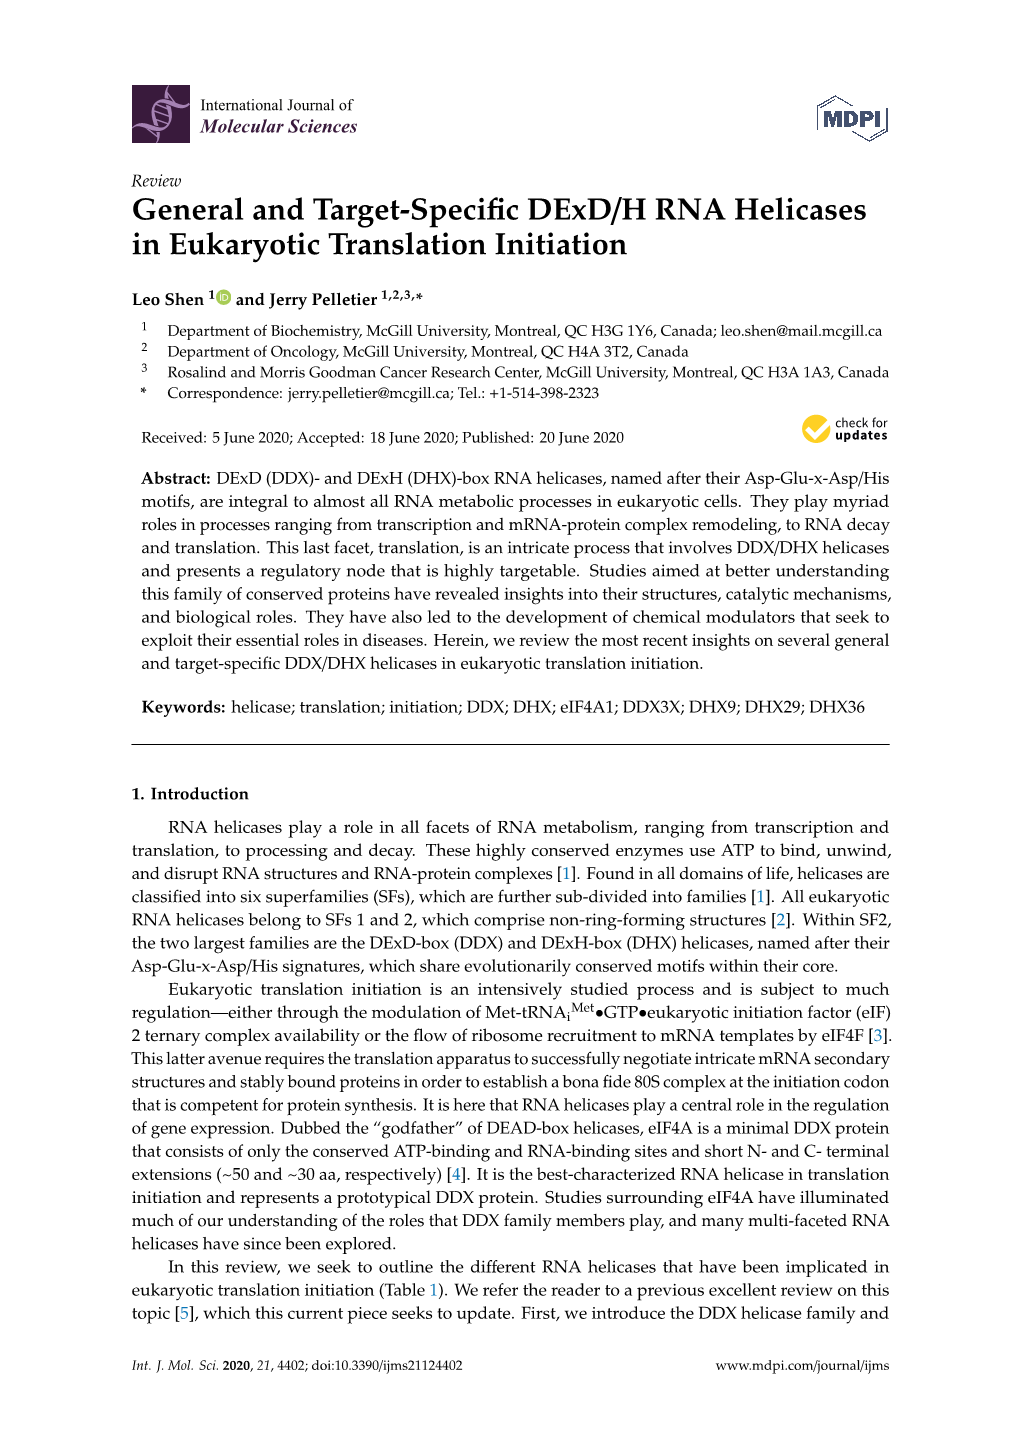 General and Target-Specific Dexd/H RNA Helicases in Eukaryotic Translation Initiation